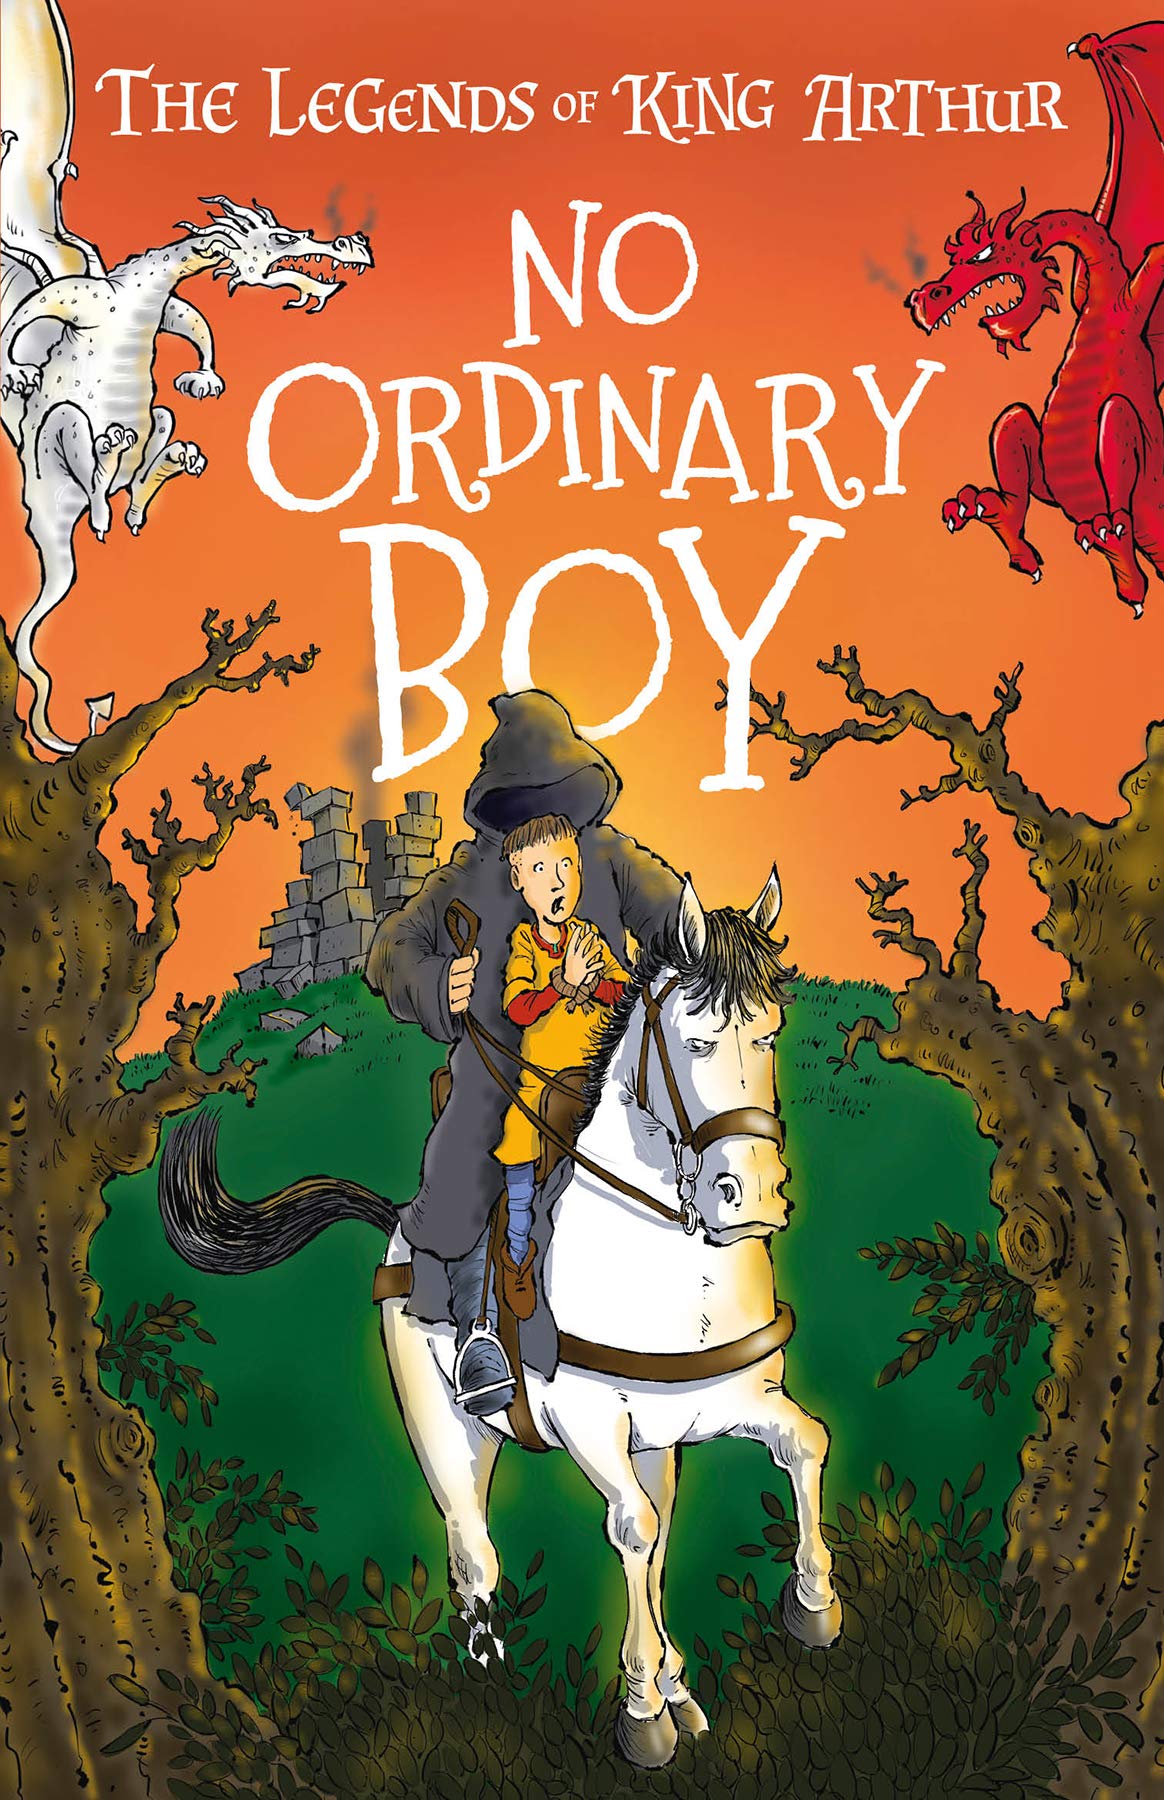 The Legends of King Arthur: No Ordinary Boy by Tracey Mayhew